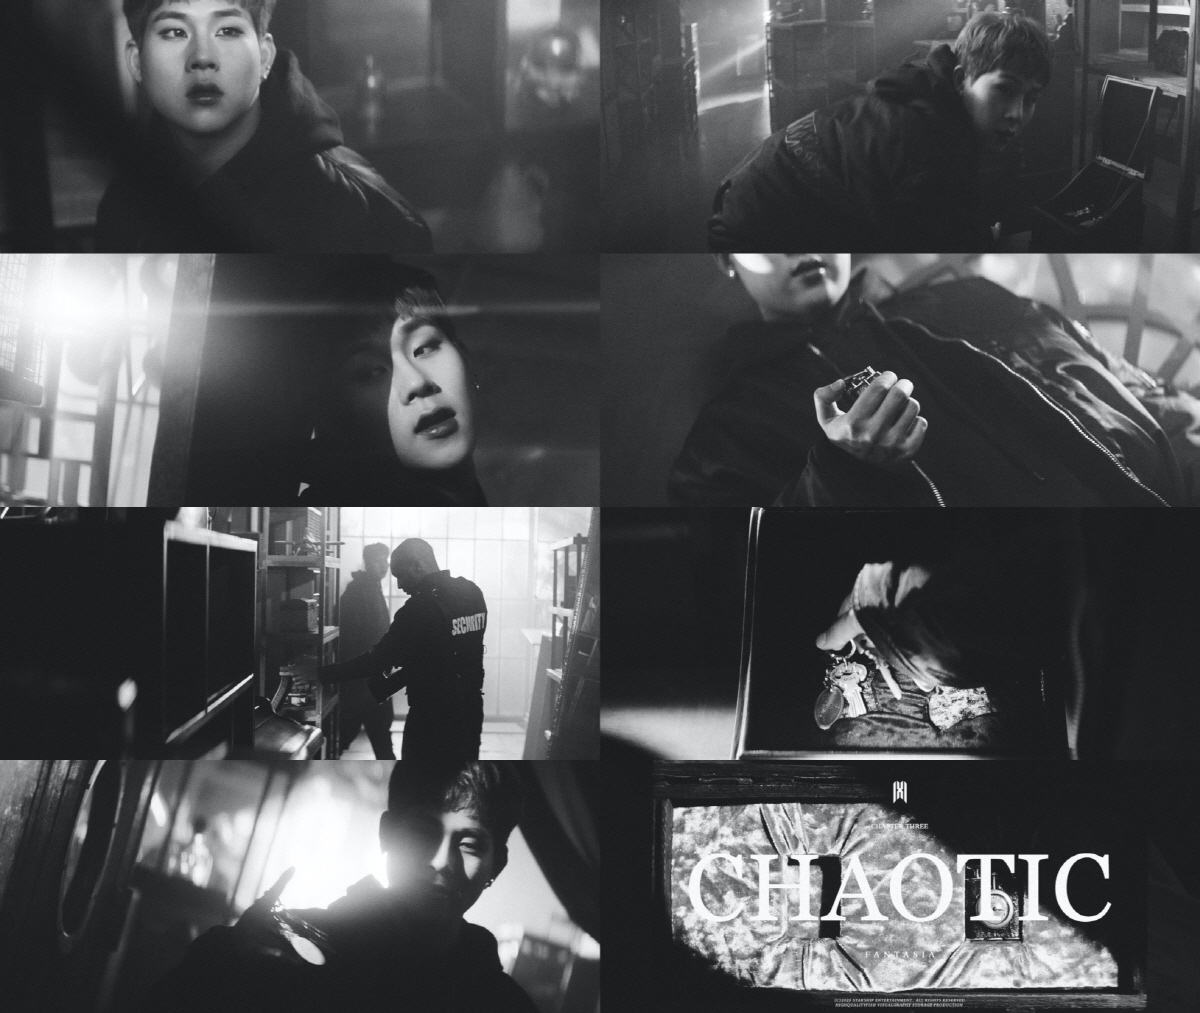 The main contribution of group Monstarrr X has focused attention on the likes of Alvin and the Chipmunks: The Road Chip.Starship Entertainment, a subsidiary company, released its new Mini album Fantasia X Trailer Chapter 3 Carotic (TRAILER CHAPTER.3 CHAOTIC) on its official SNS channel on the 21st.The main contribution in the open trailer chapter finds the key in the box, intruding into the space filled with various objects.Feeling the popularity of the security agent, he hides himself when his position is in danger of being discovered, takes out the lighter he had in his arms and turns on the light.All moments, including the agents movements, stop in a flash, and The main contribution takes out the key and sneaks out of the scene.The main contribution was a playful look and witty look, revealing the face of Alvin and the Chipmunks: The Road Chip, who did not know where to go, and smiled at the mouths of viewers.In addition, the key that appeared in the Trailer chapter of Hyungwon and Shownu was discovered, which caused interest in what kind of connection between the three people would appear.From the beginning, sensual beats and magnificent melodies also raise questions about new albums and new songs.As such, Monstarrr X predicts the album of all time through the development that makes it impossible to keep an eye on each release, and the Trailer chapter with movie-like quality, overwhelming scale, and addictive beat.The fifth album on the Billboard 200 with the US regular album All About Love (ALL ABOUT LUV) released in February this year, and the Japanese single Wish on the same sky released on the 15th, ranked first and second on the tower record and Billboard Japan weekly charts, respectively, gathering expectations of what new albums will be returned to global fans attention. Here.Monstarrr X (Shownu.Democratic reform.Wait.Hyungwon.The main contribution.IM) is spurring preparations for a comeback ahead of the release of the album Fantasia X on May 11th.